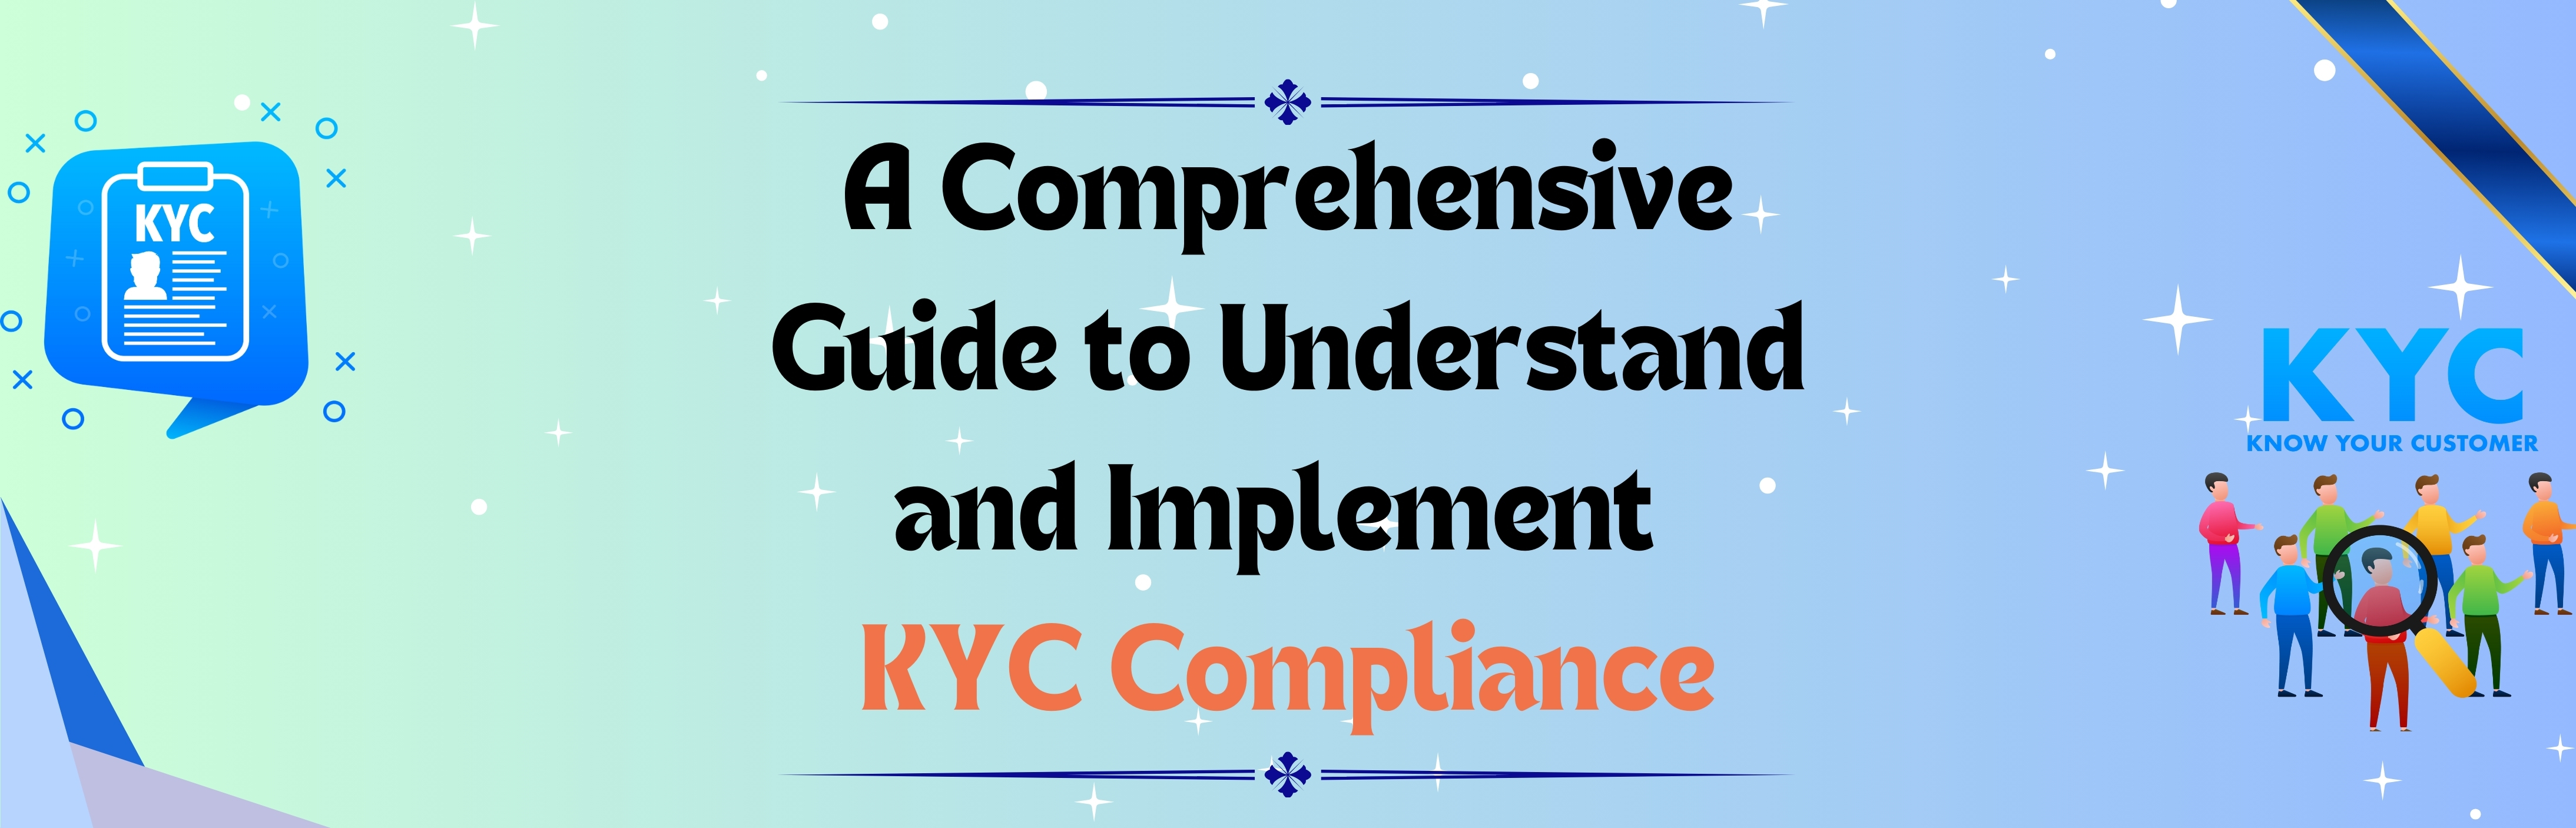 Comprehensive Guide to Understand and Implement KYC Compliance